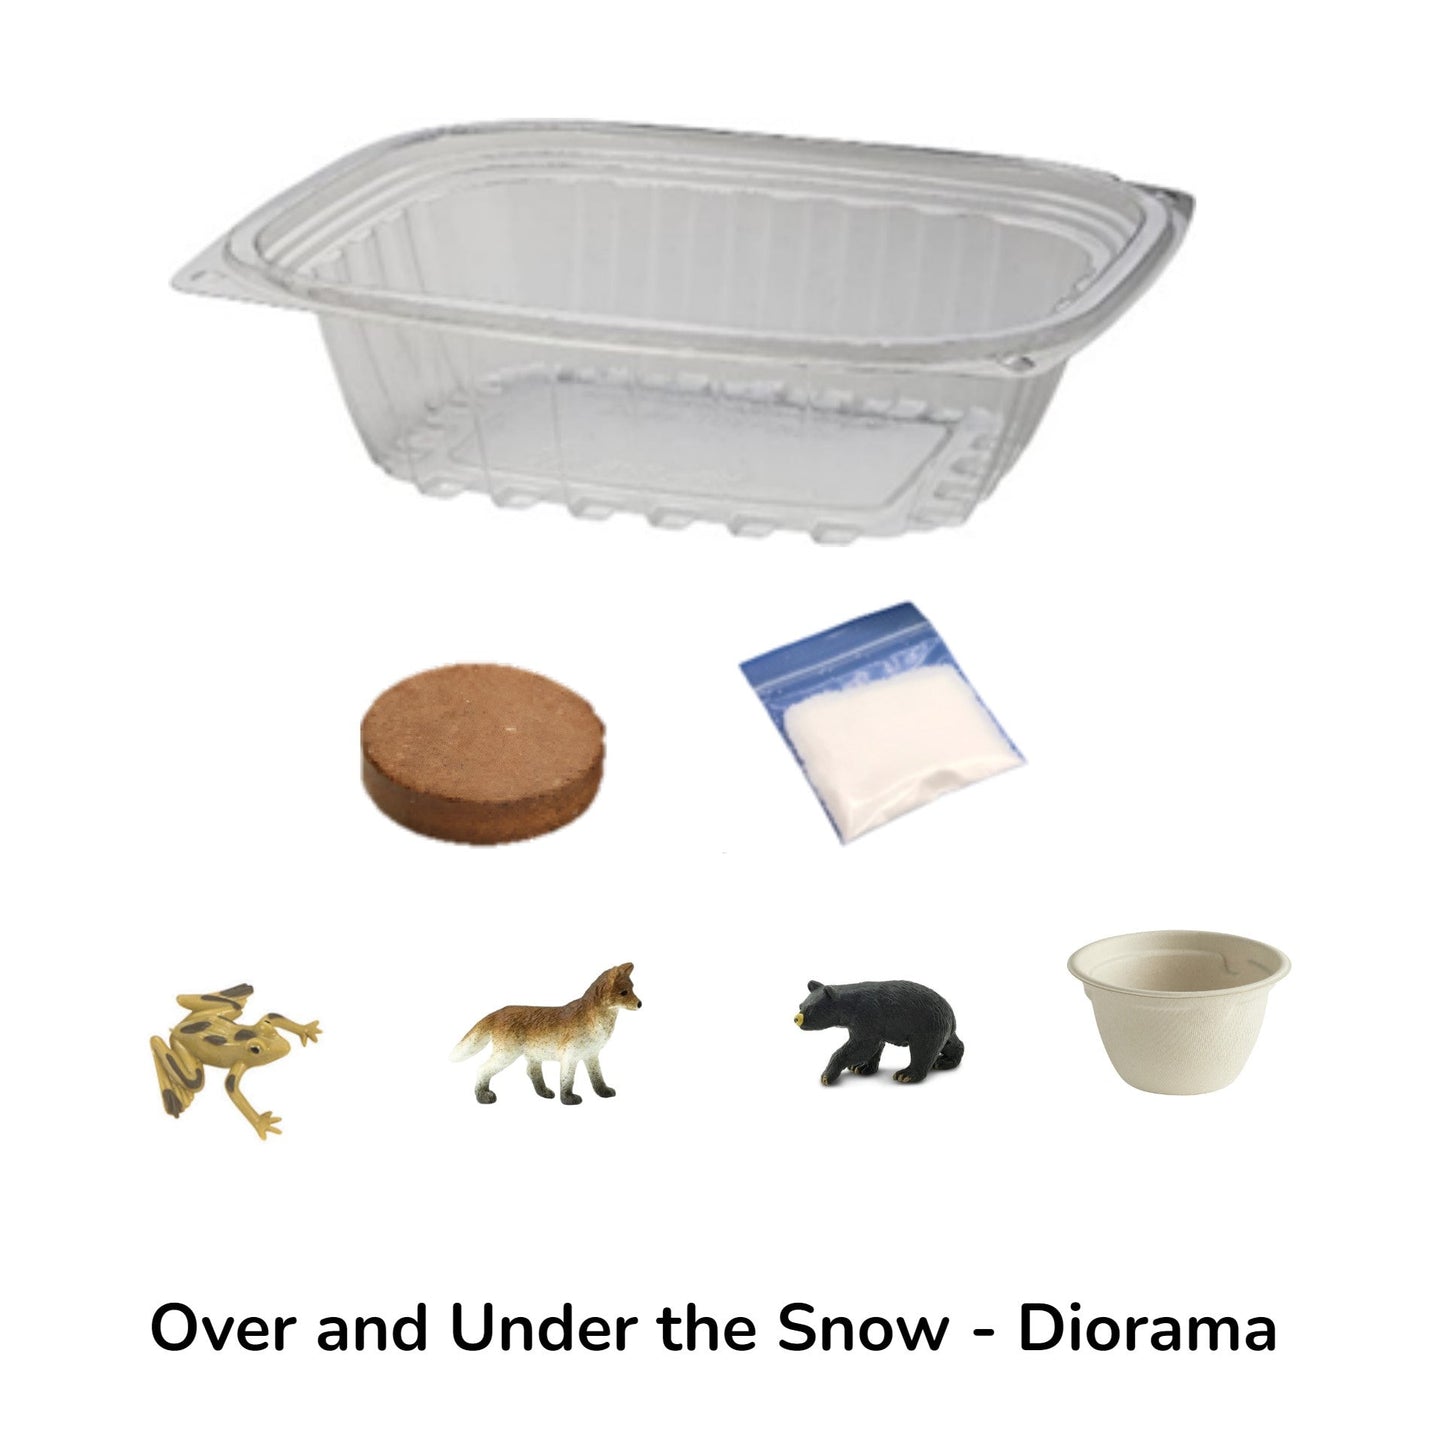 Over and Under the Snow Book Activities